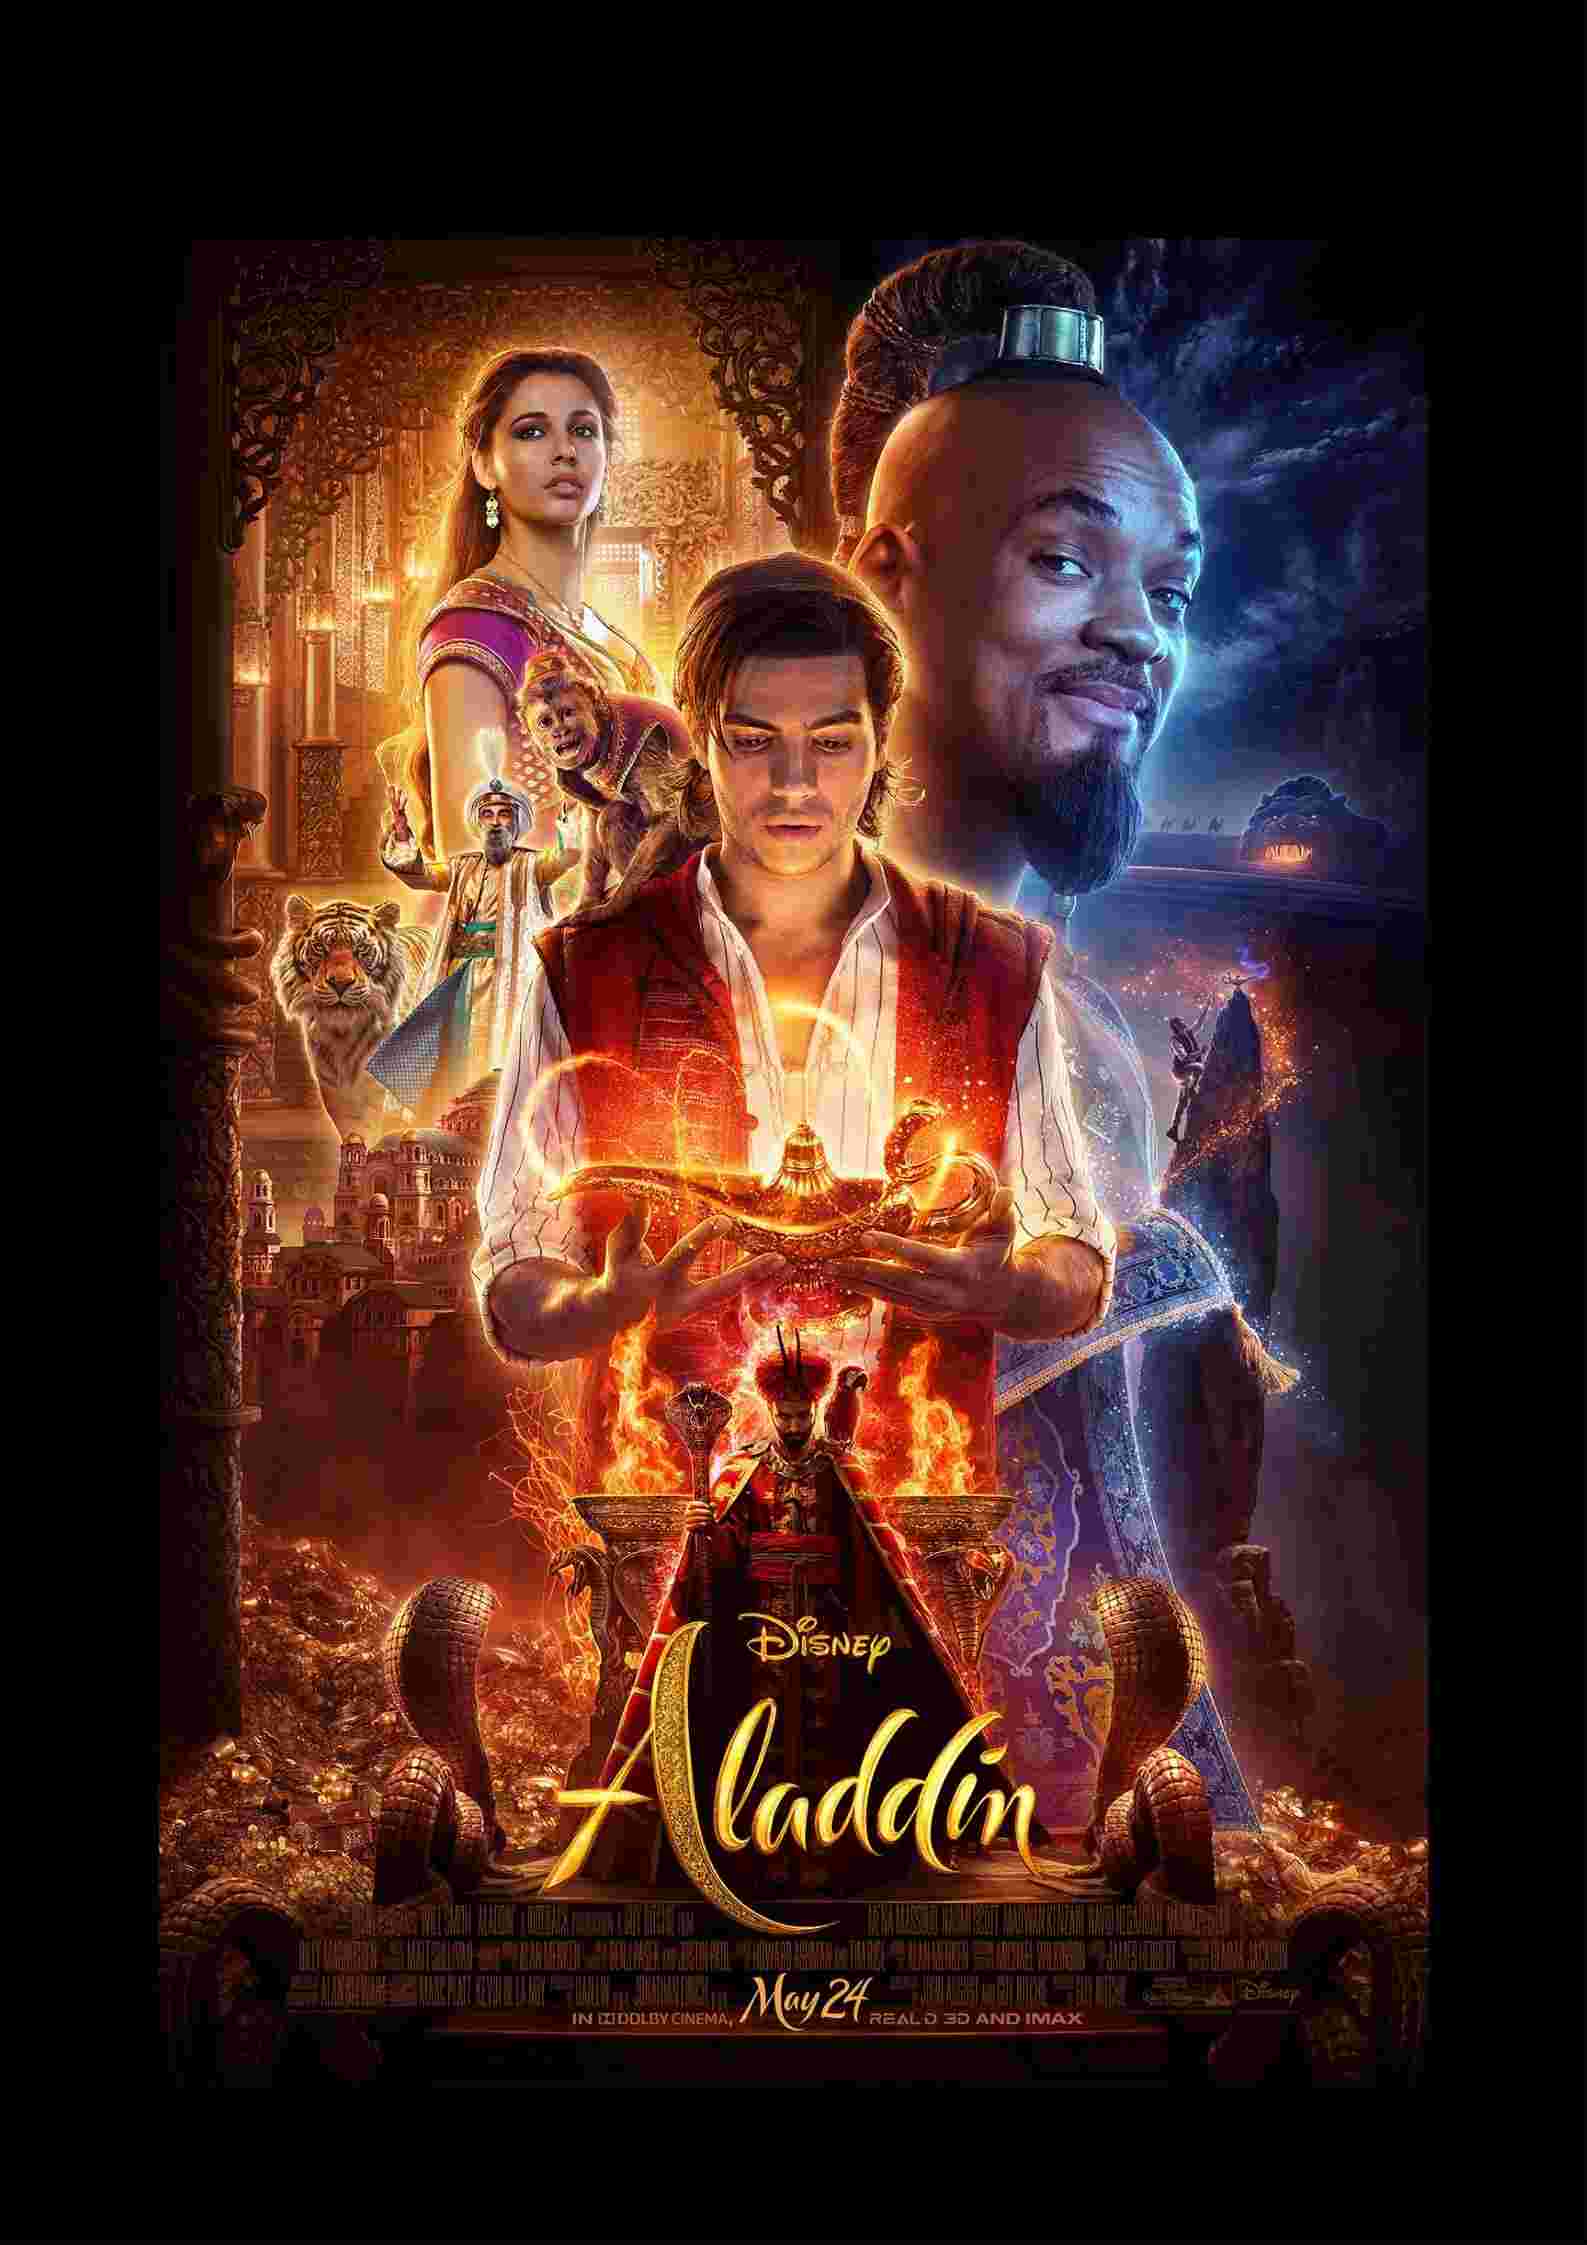 Aladdin Parents Guide and Age Rating | 2019